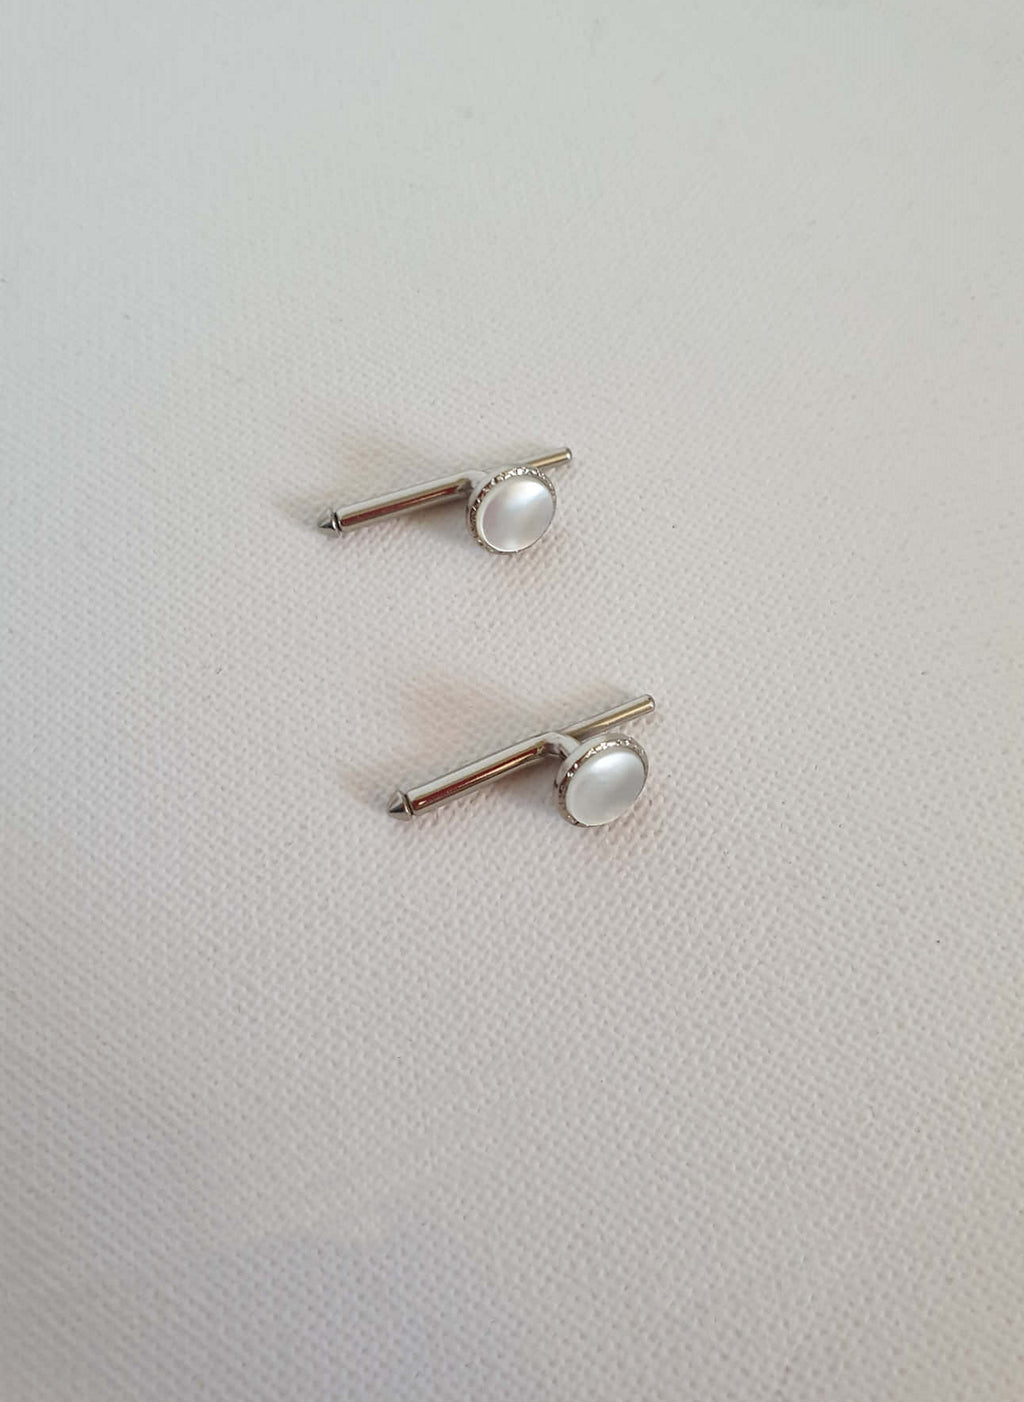 vintage two silver tone pearl shirt studs